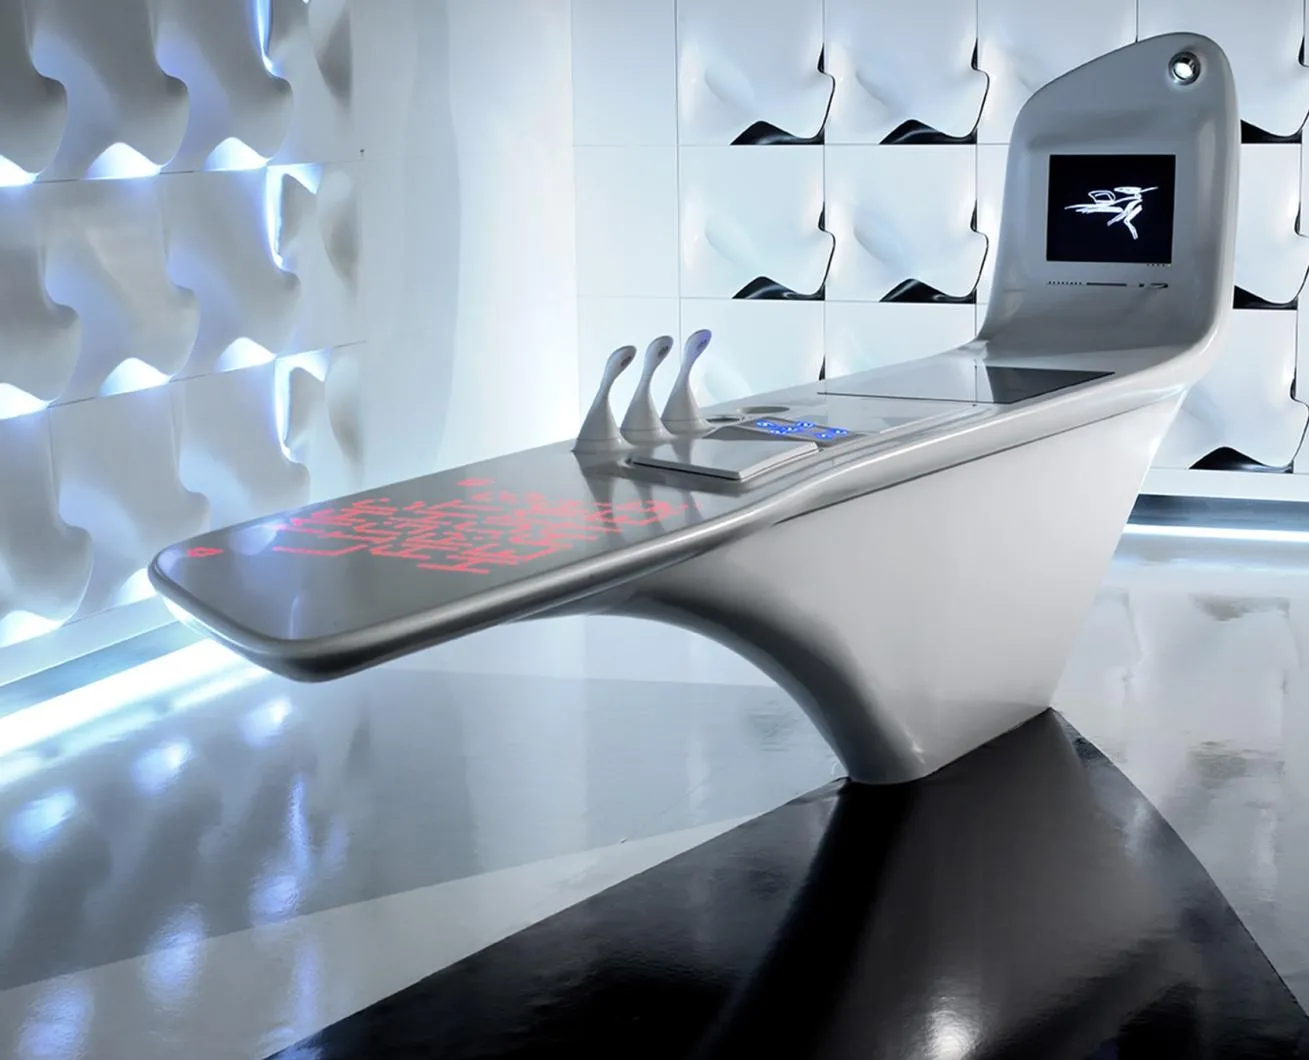 Z-island | Zaha Hadid and her visionary approach to kitchen design.